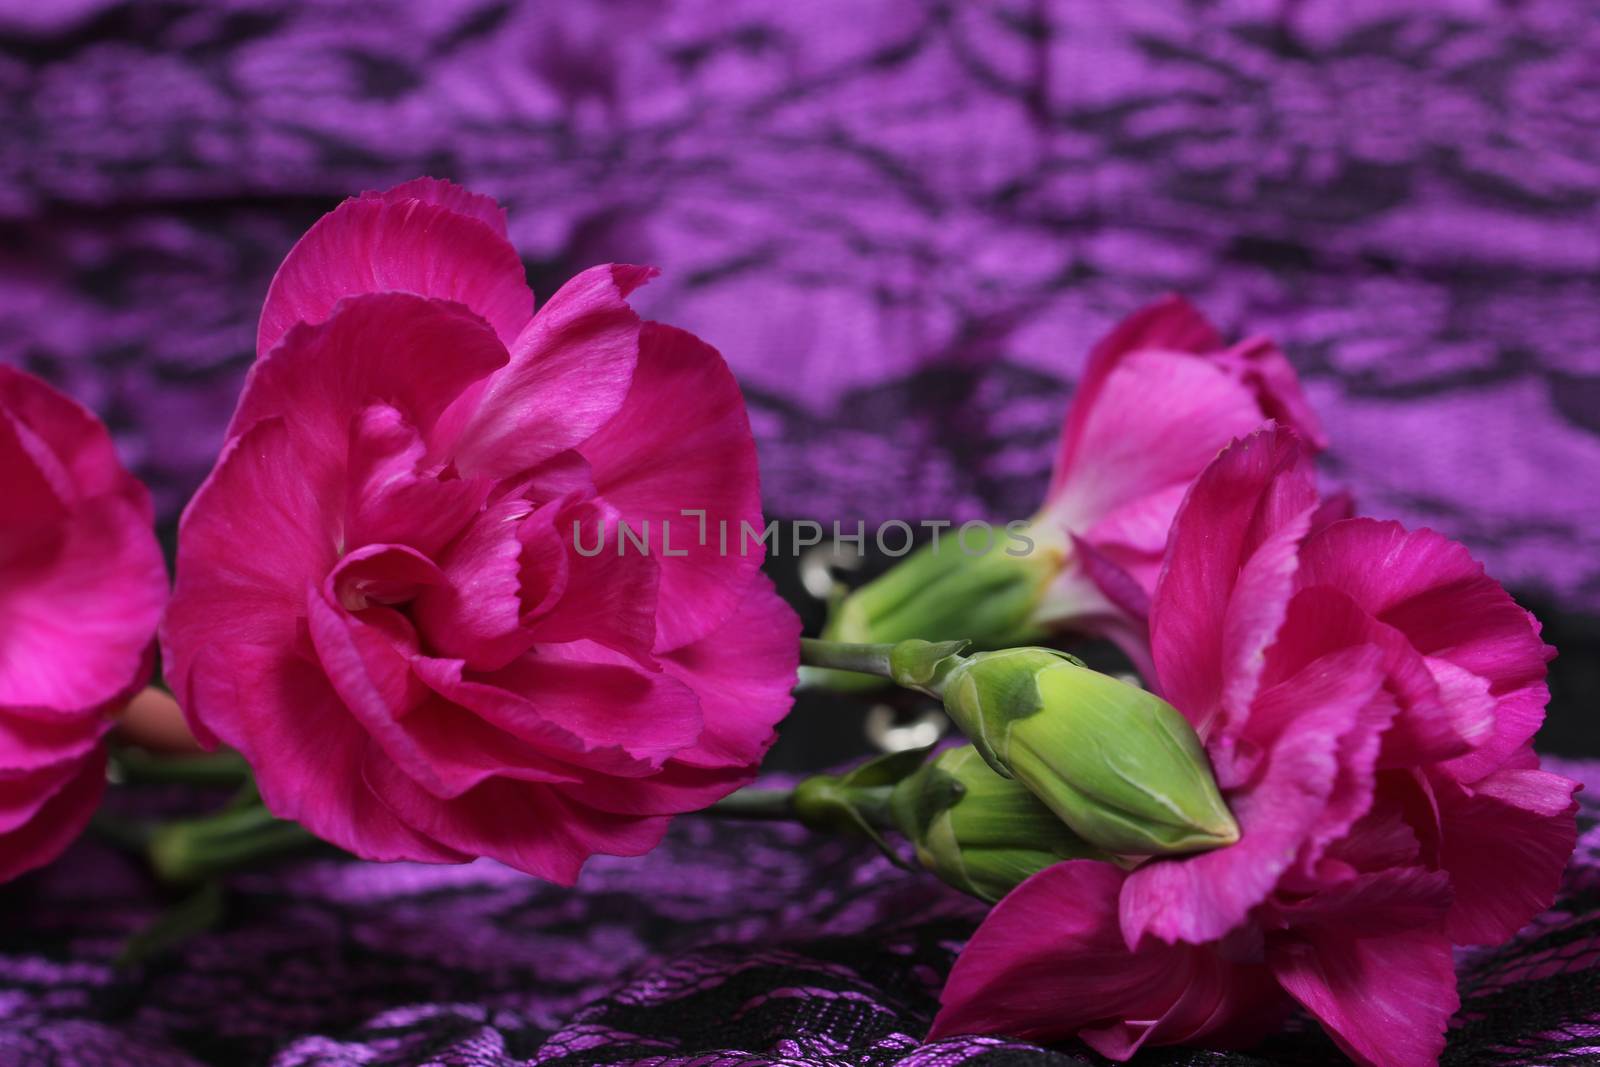 Pink Flowers on Purple and Black Fabric by Marti157900